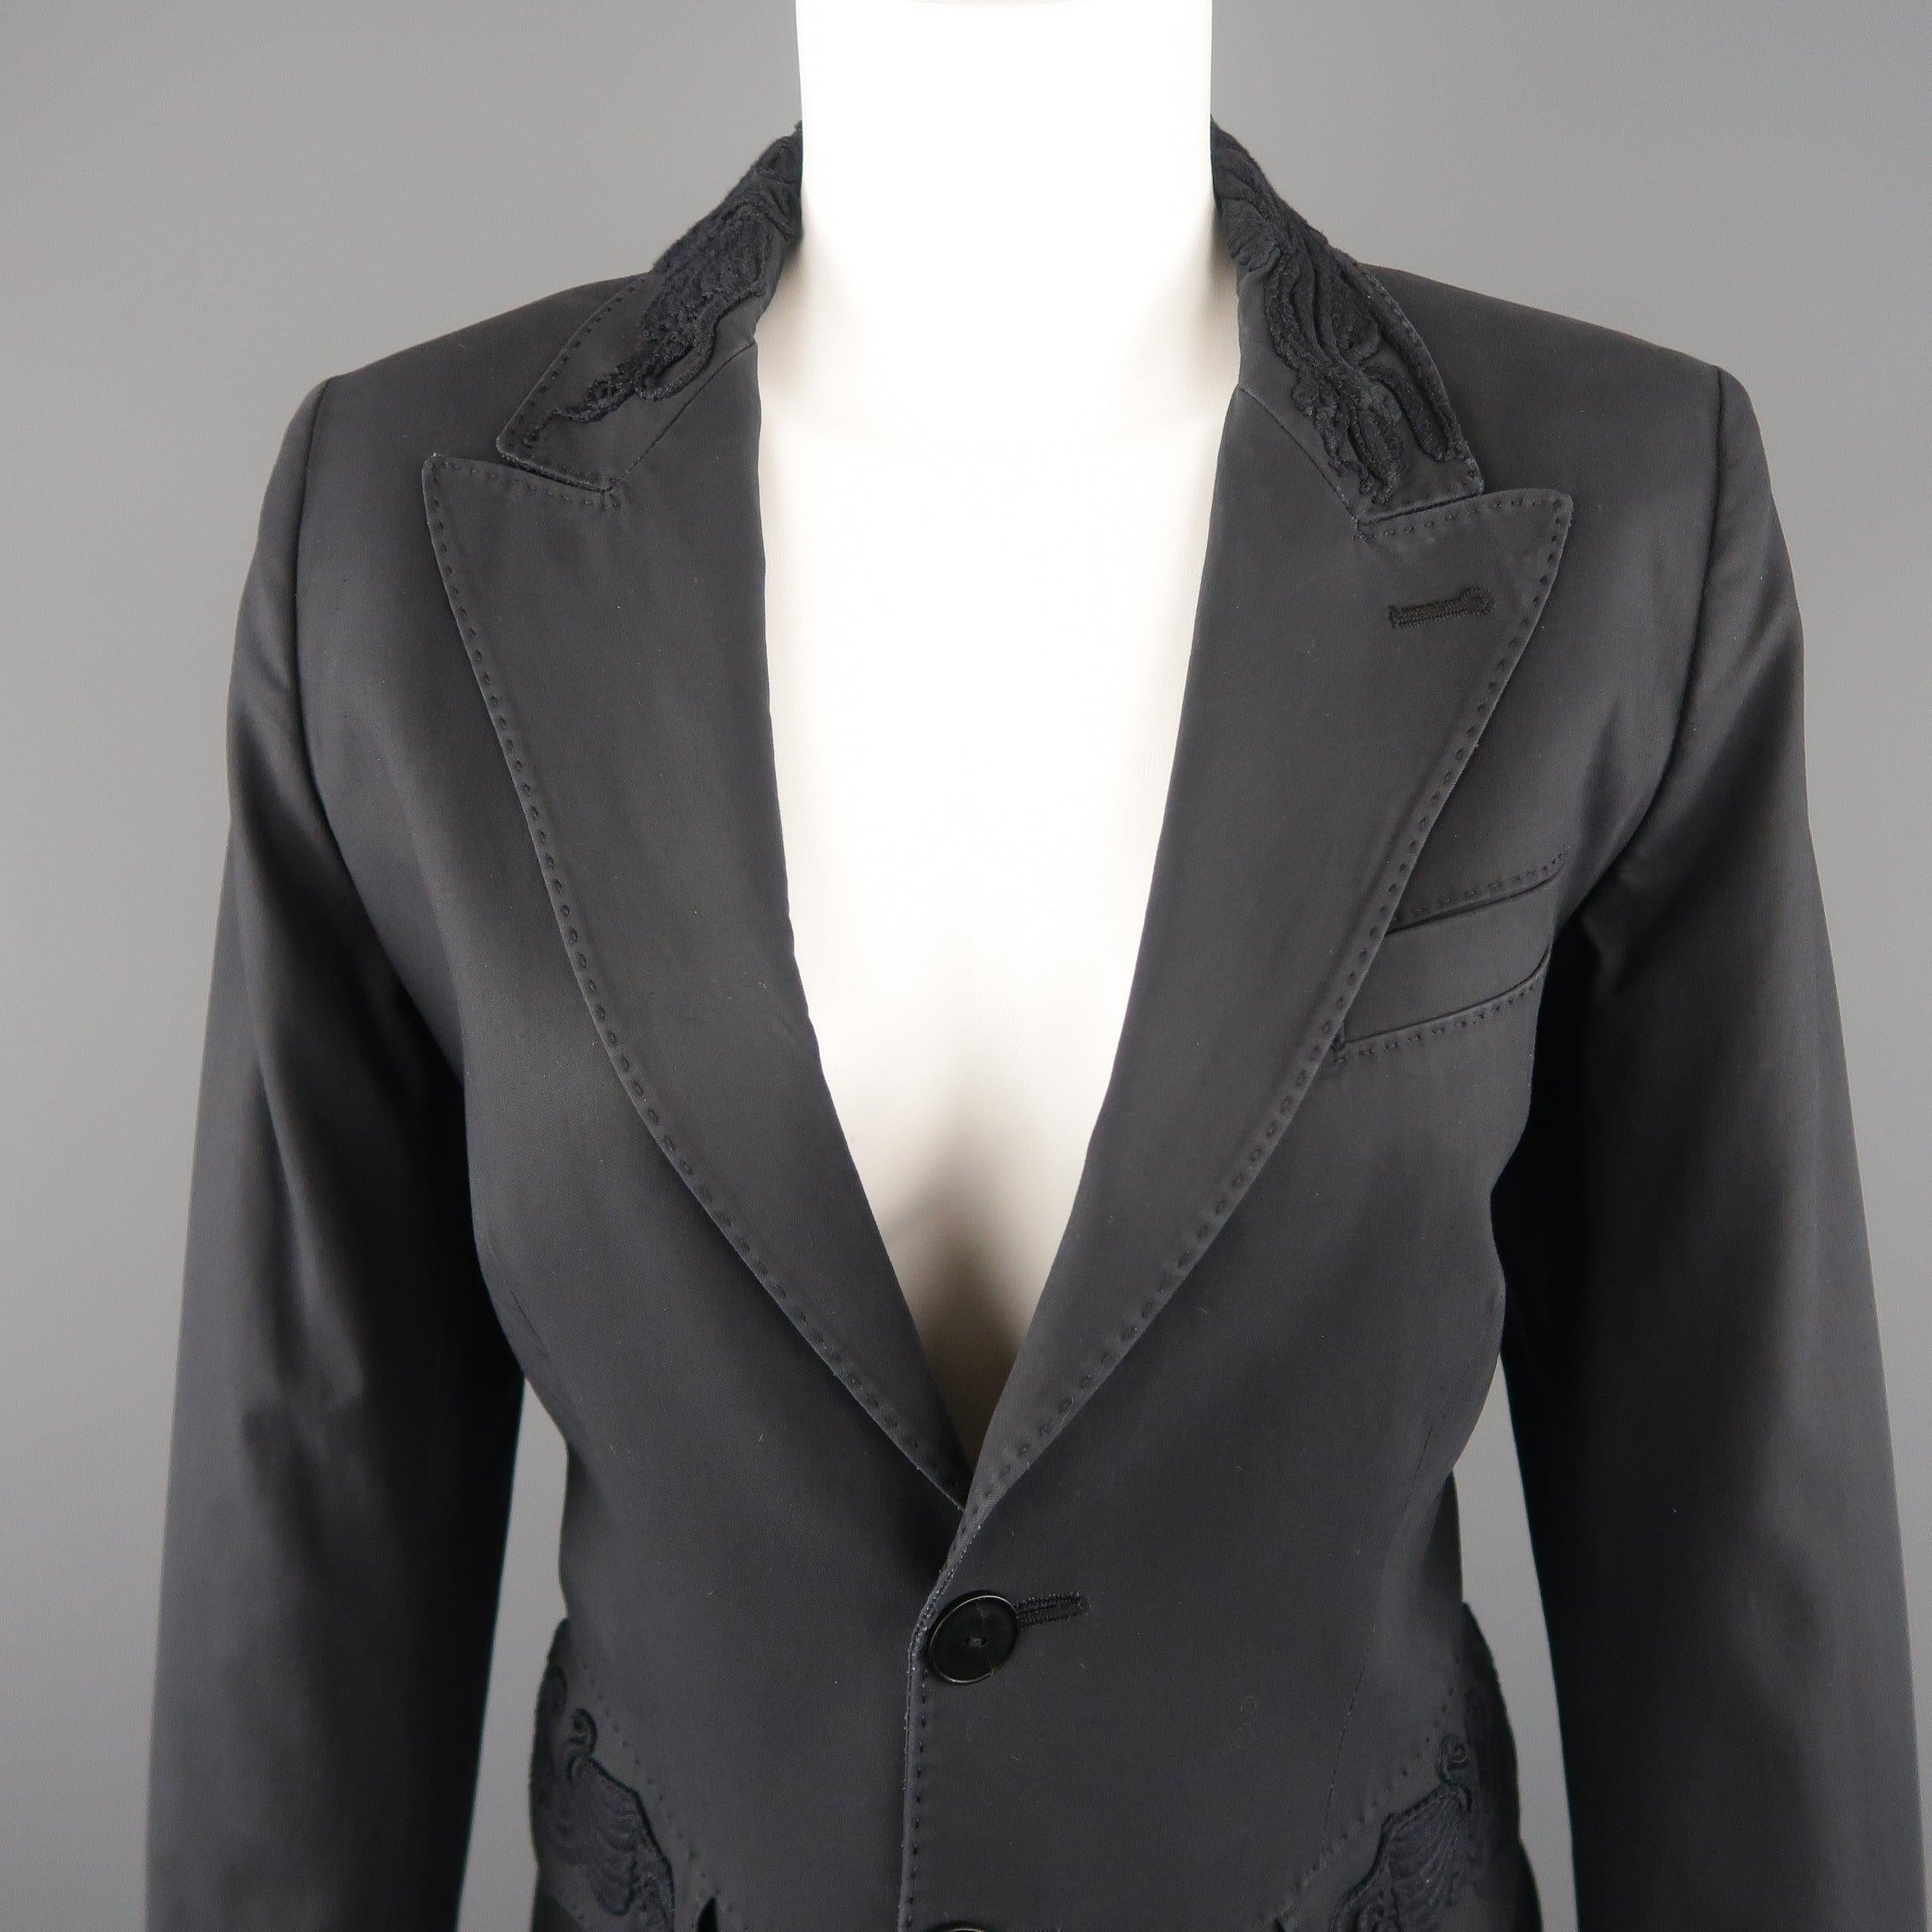 JEAN PAUL GAULTIER blazer jacket comes in dark gray cotton with a single breasted three button front, peak lapel, top stitching details throughout, functional button cuffs, detailed flap pockets, and embroidery accents. Wear. As-is. Made in